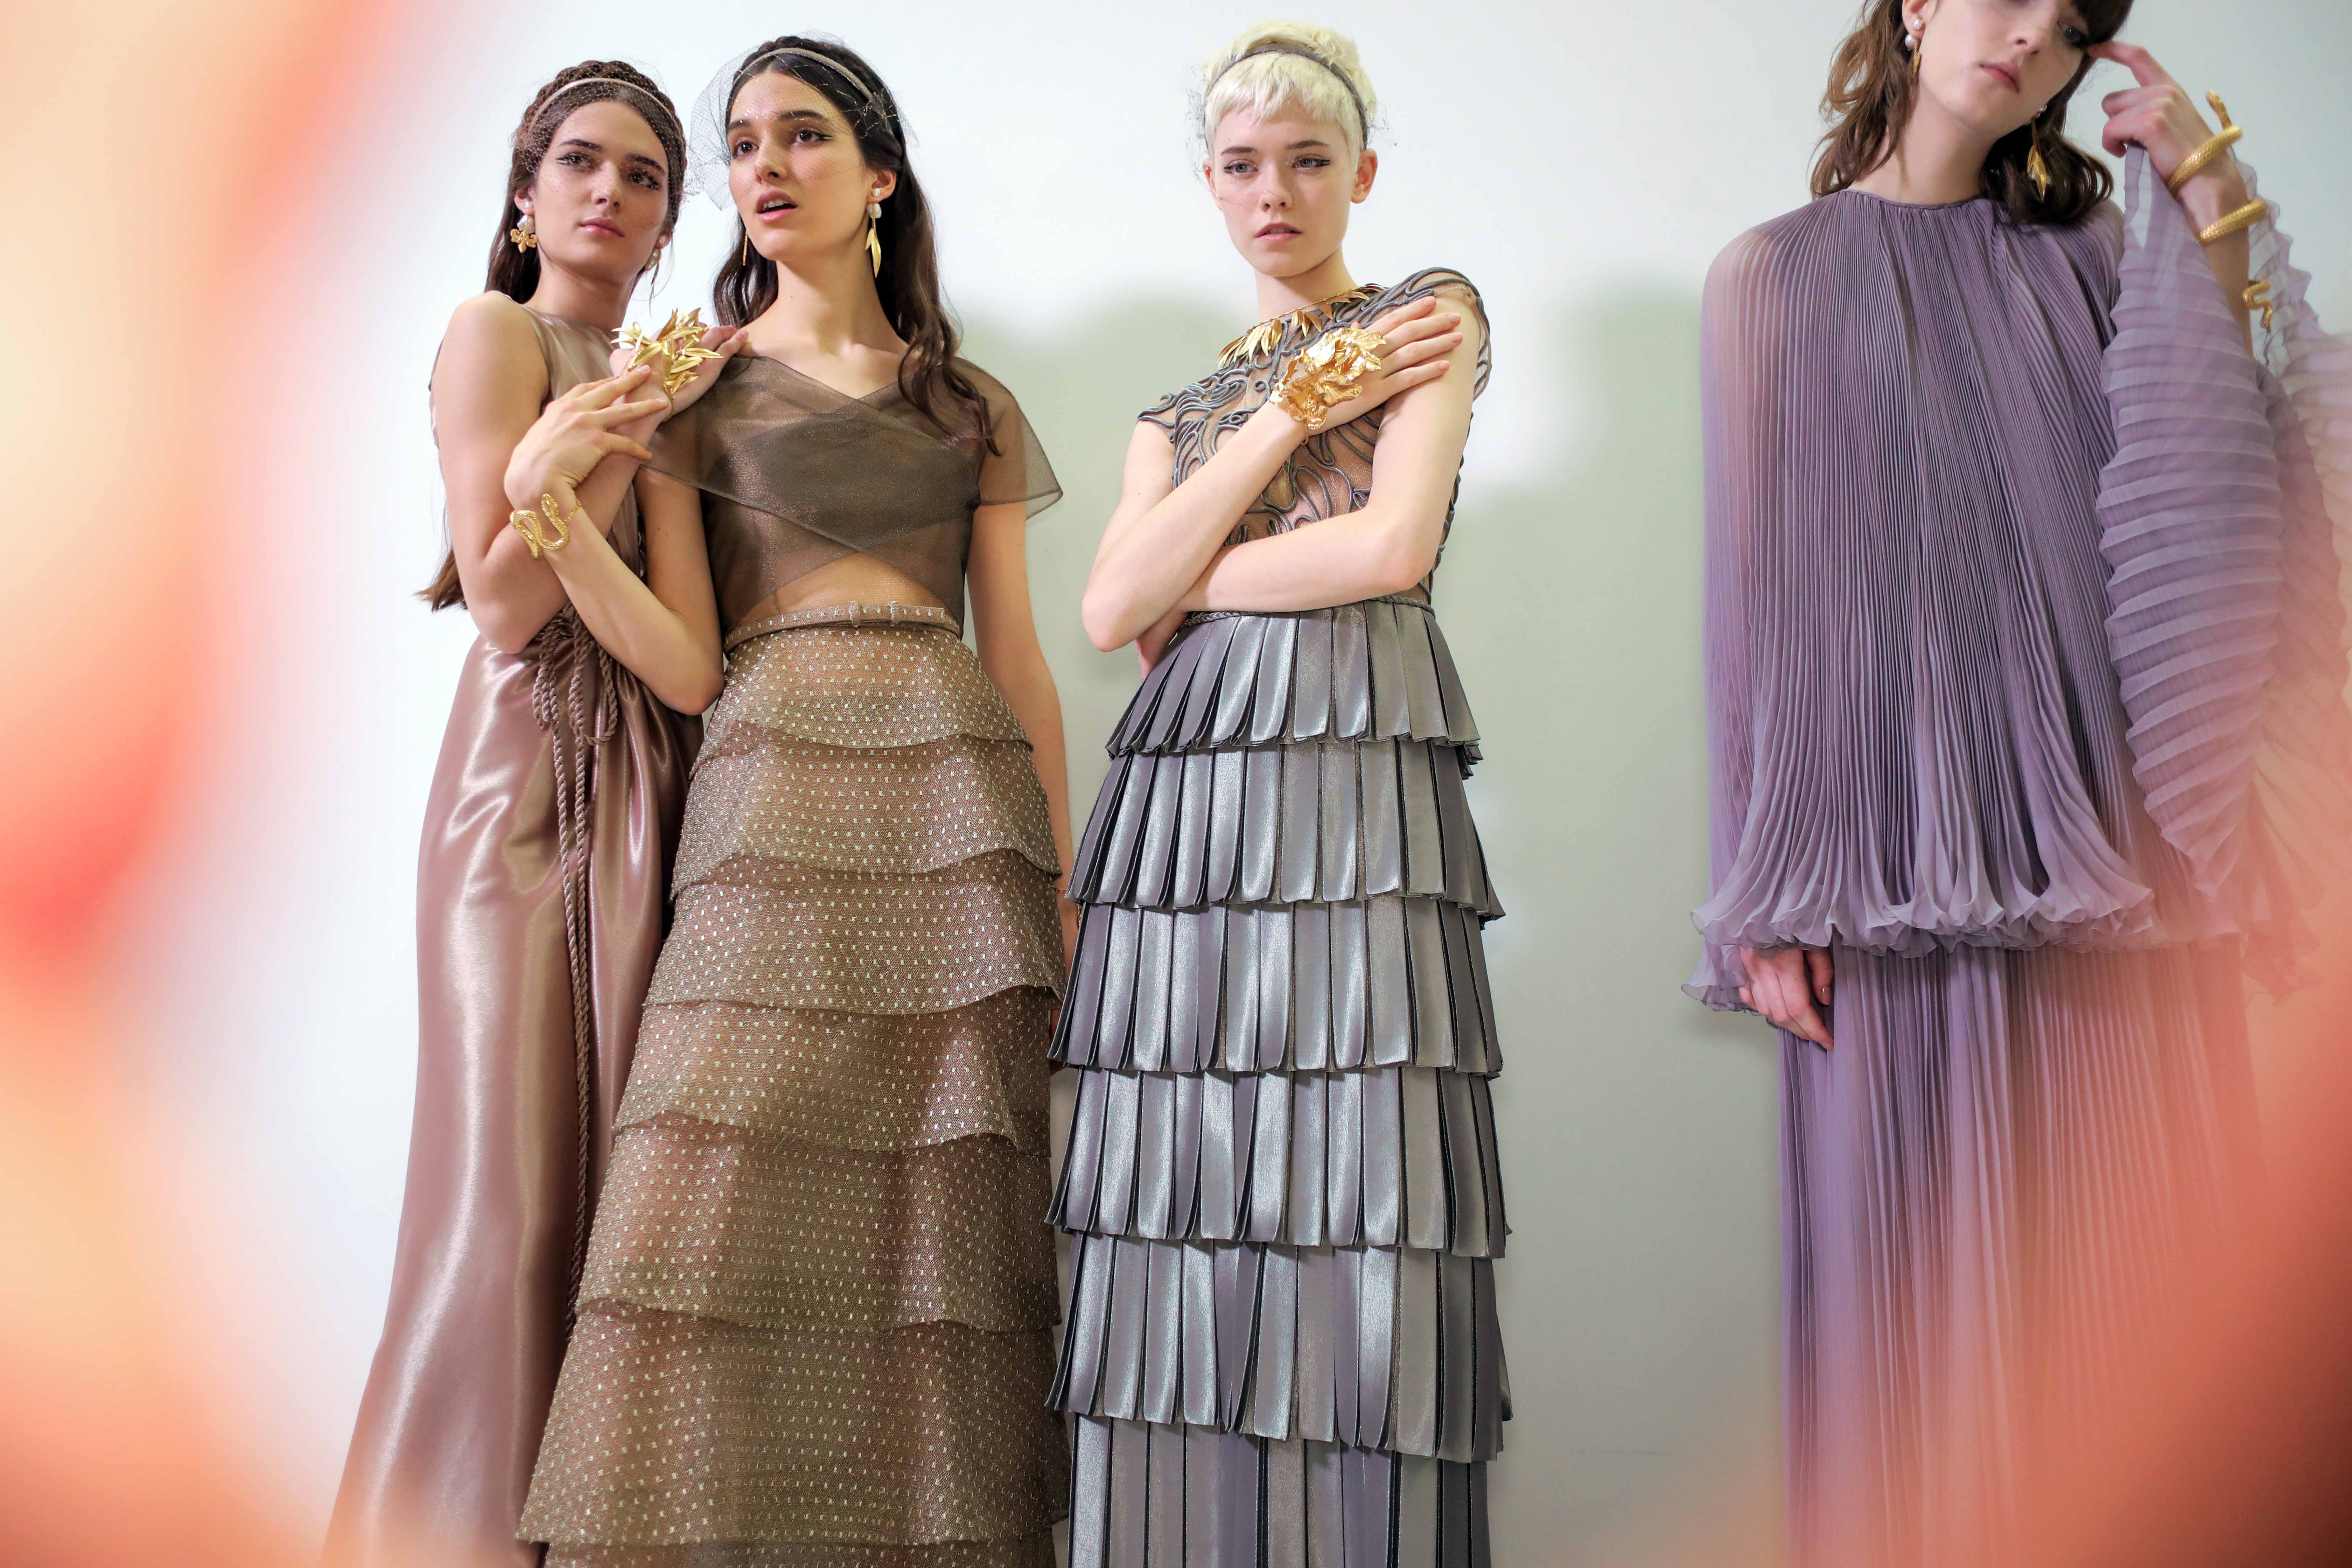 In Pictures behind the scenes at Christian Dior